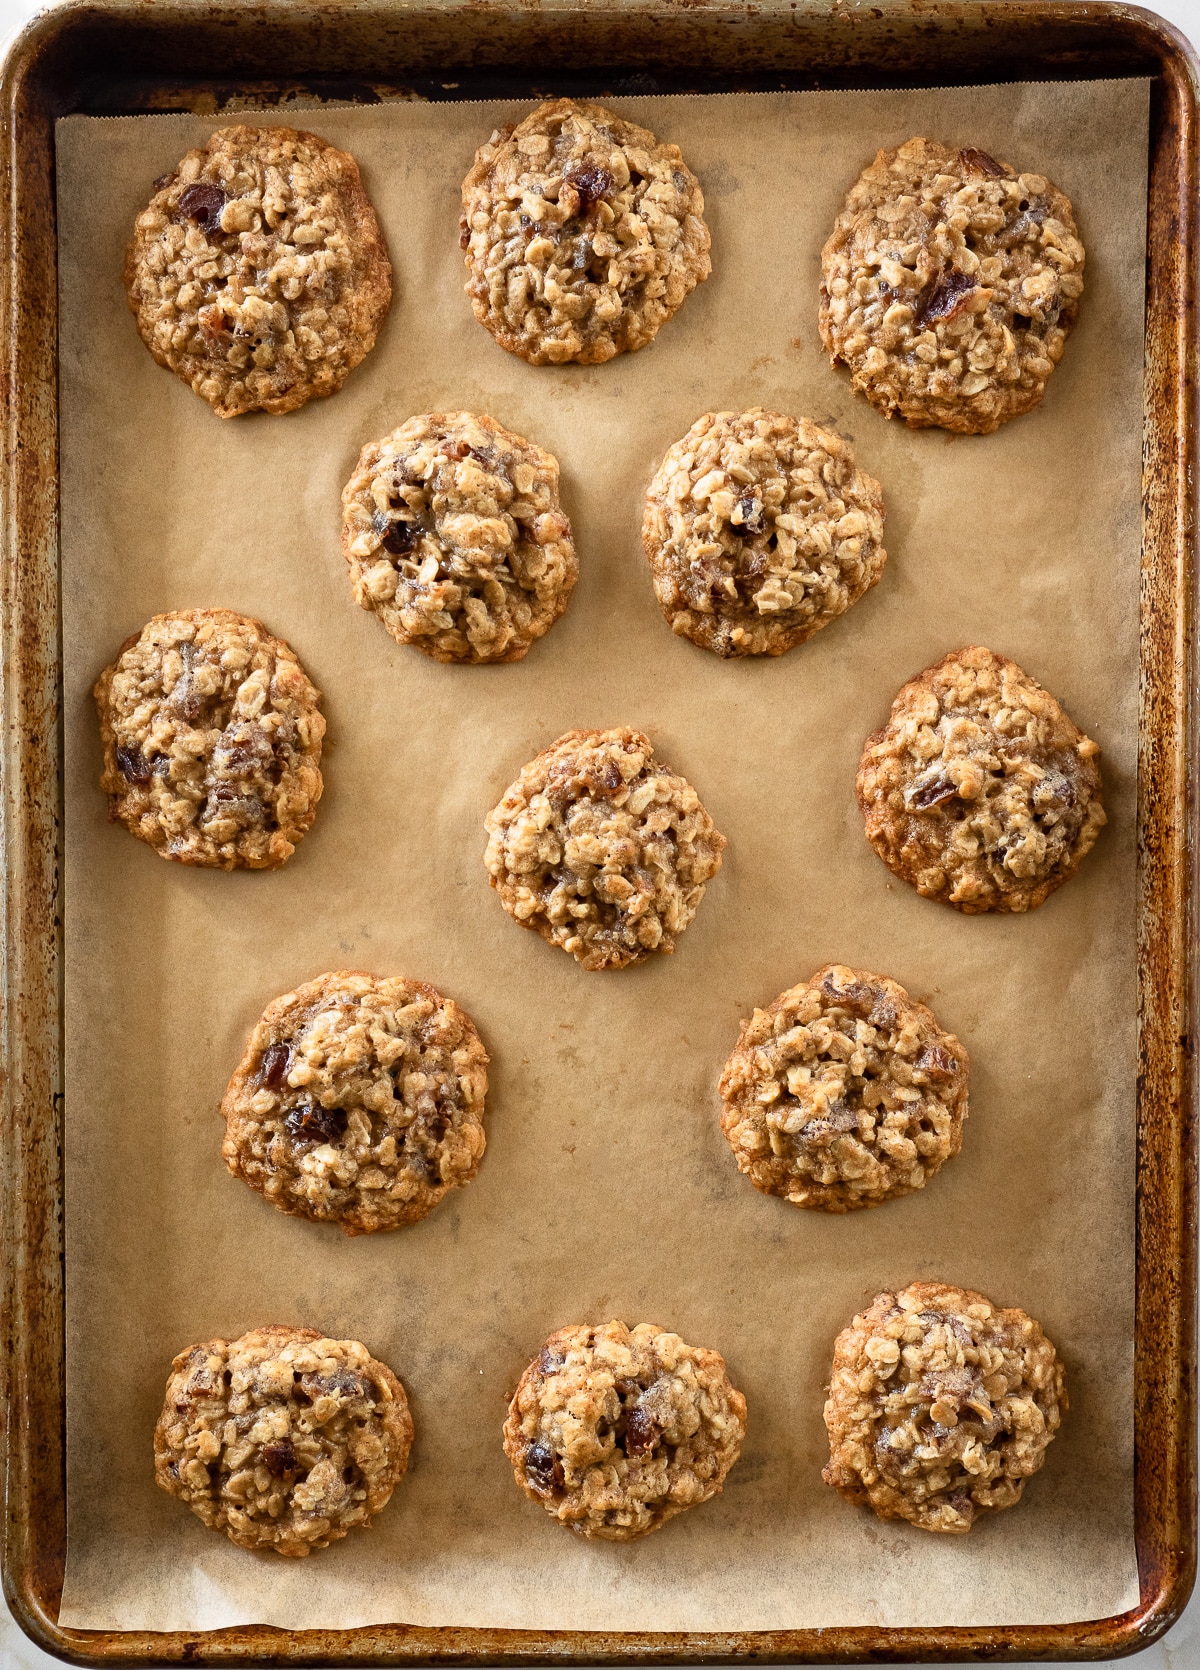 Baked oatmeal date cookies on baking sheet.